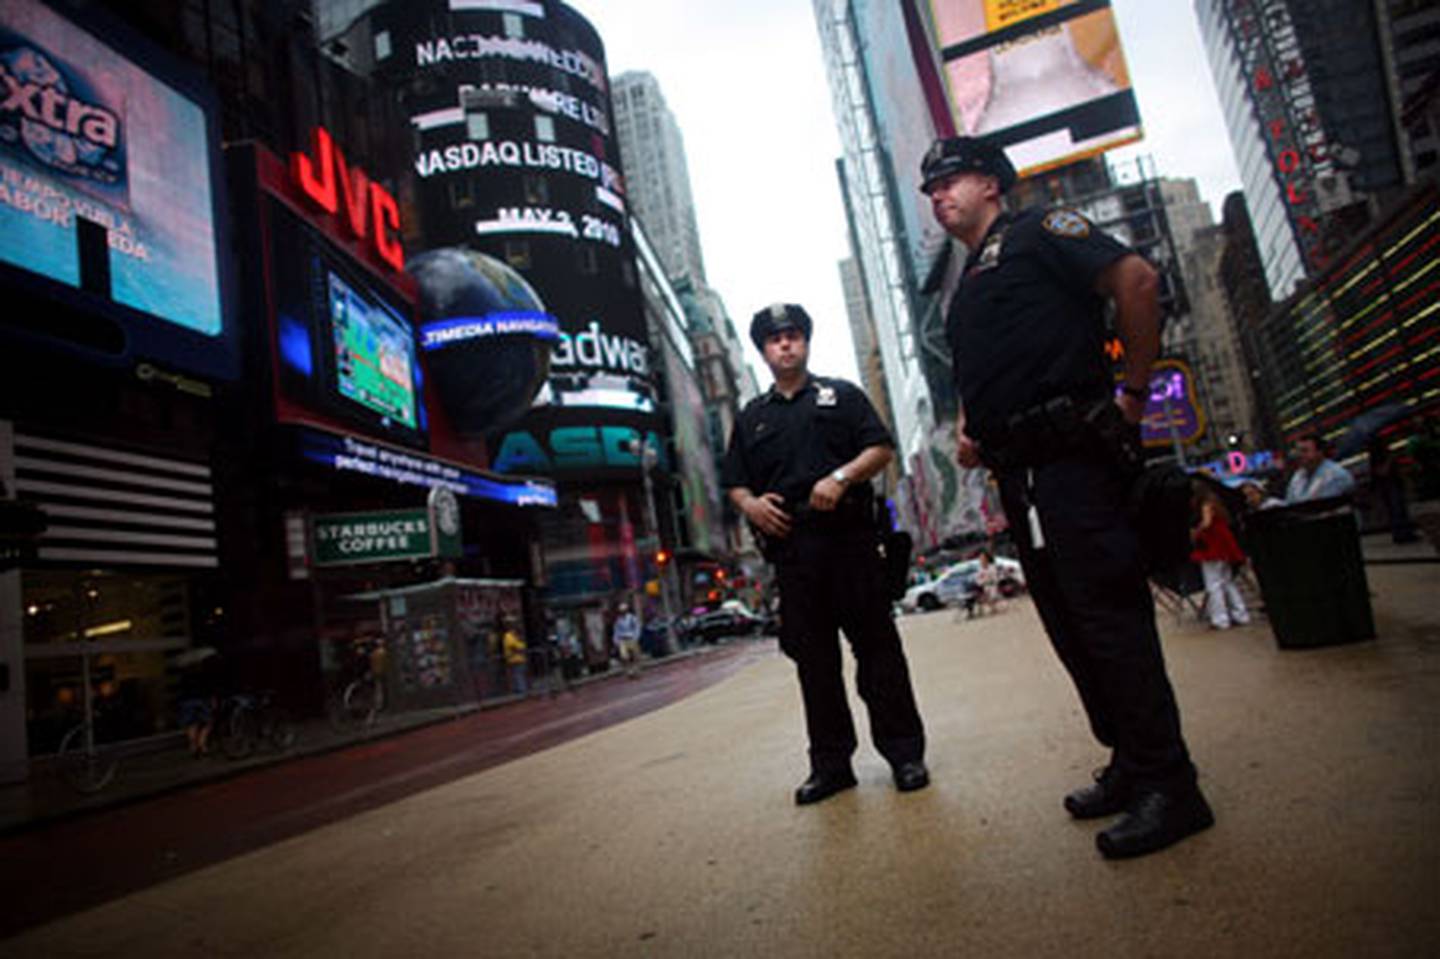 New York police stand guard in Times Square.